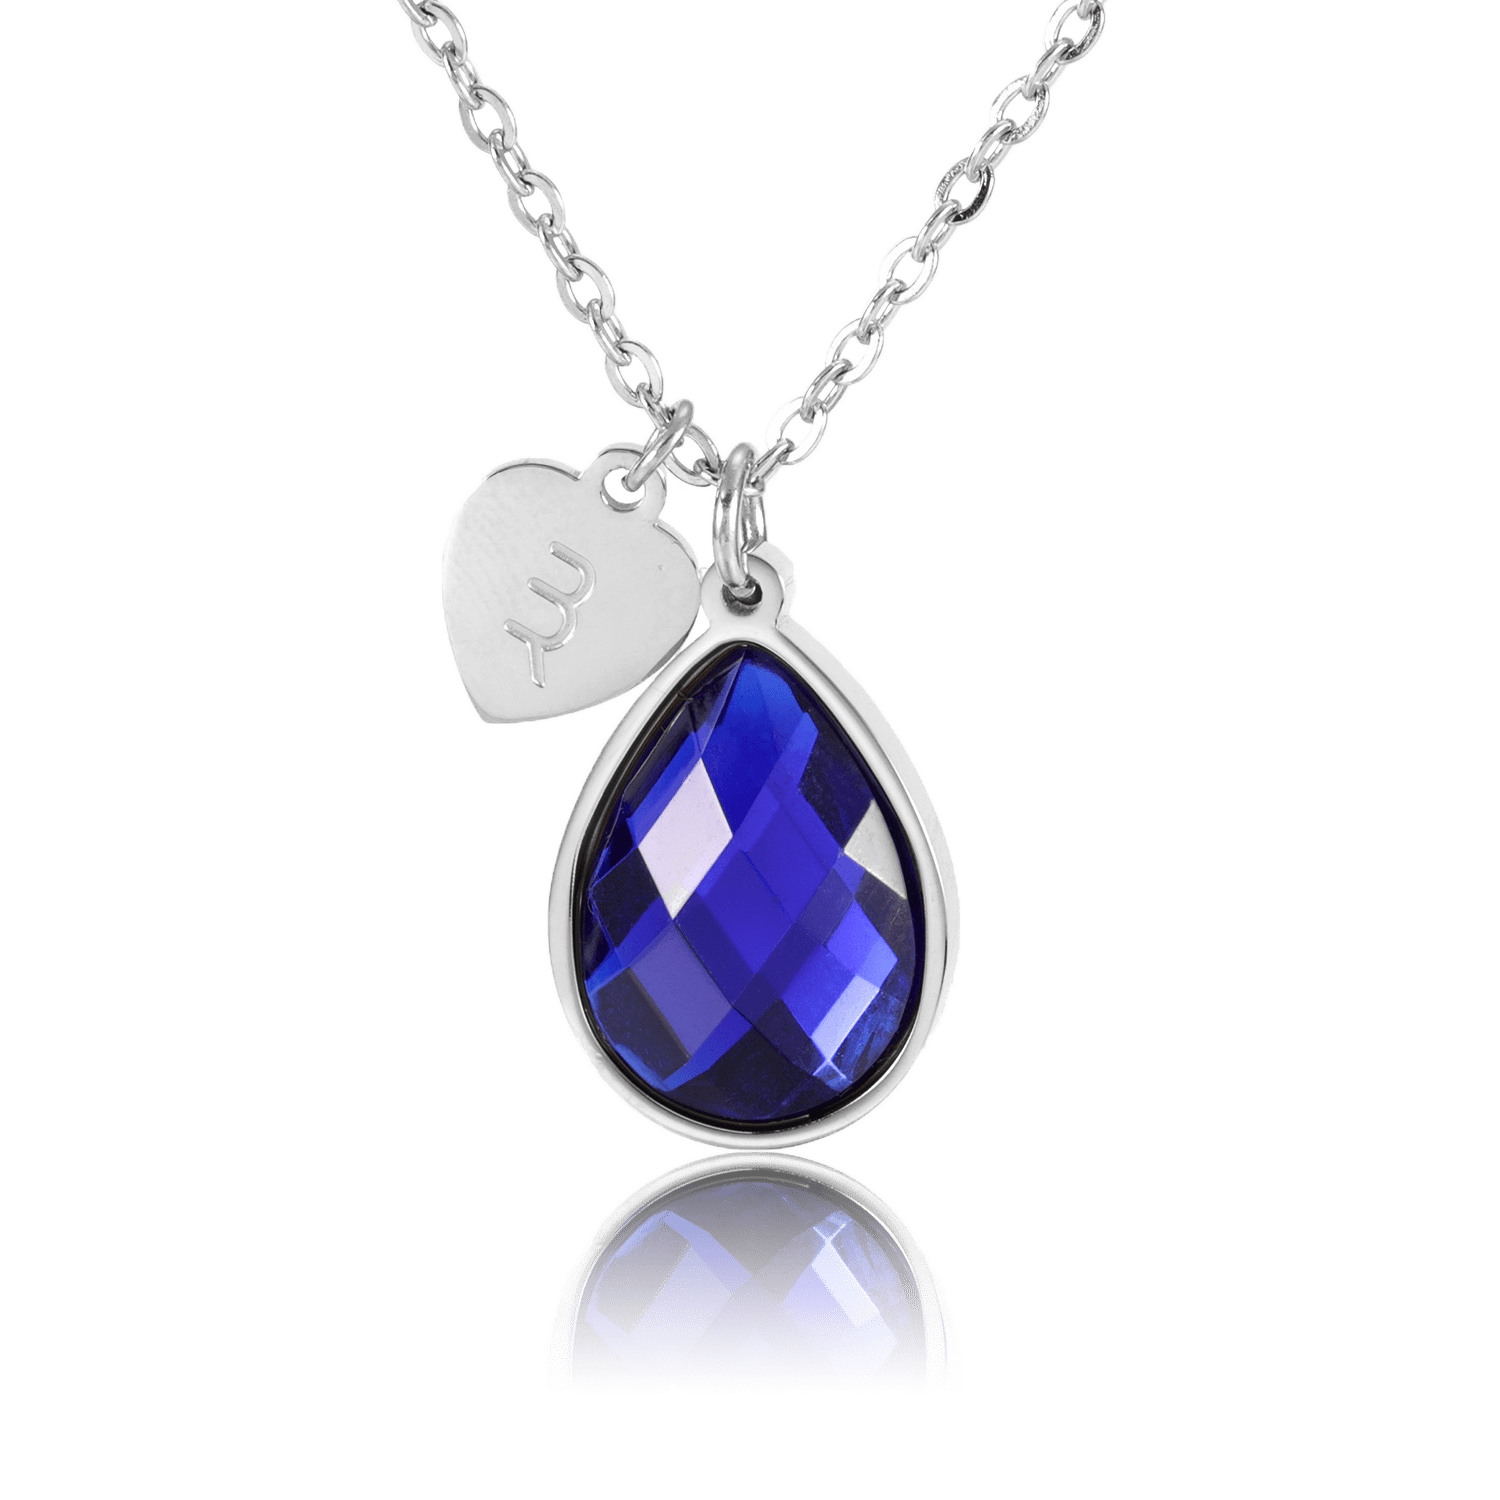 bianco rosso Necklaces Silver December Birthstone - Tanzanite cyprus greece jewelry gift free shipping europe worldwide